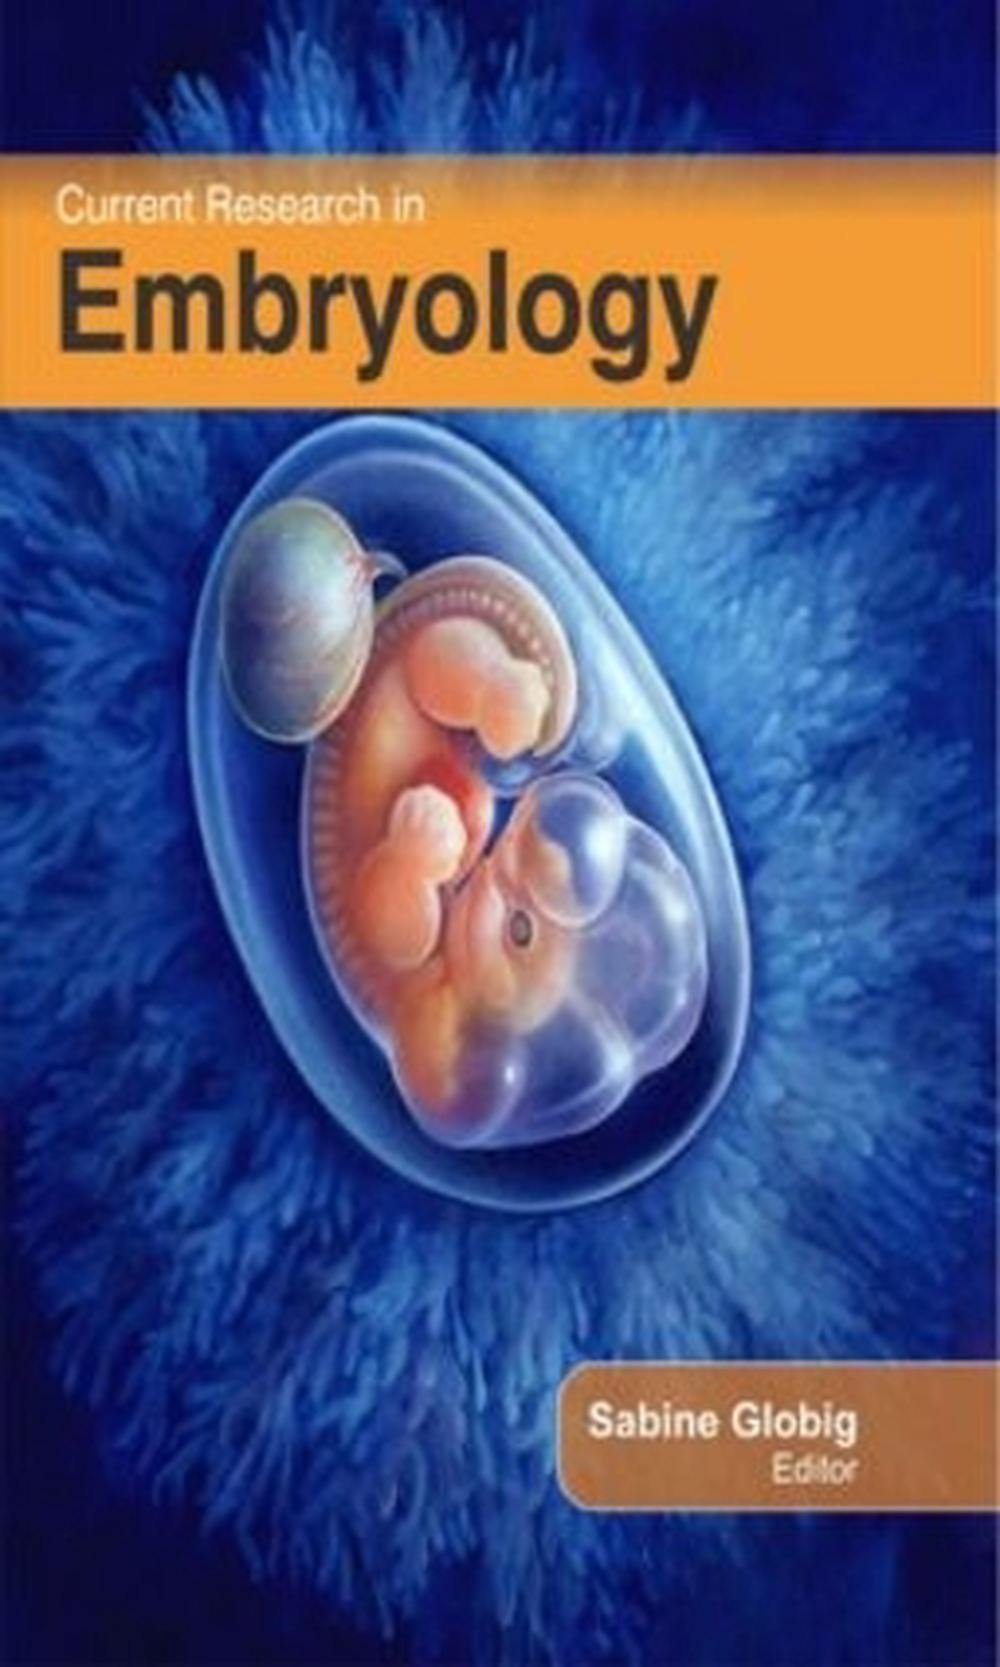 latest research papers on embryology